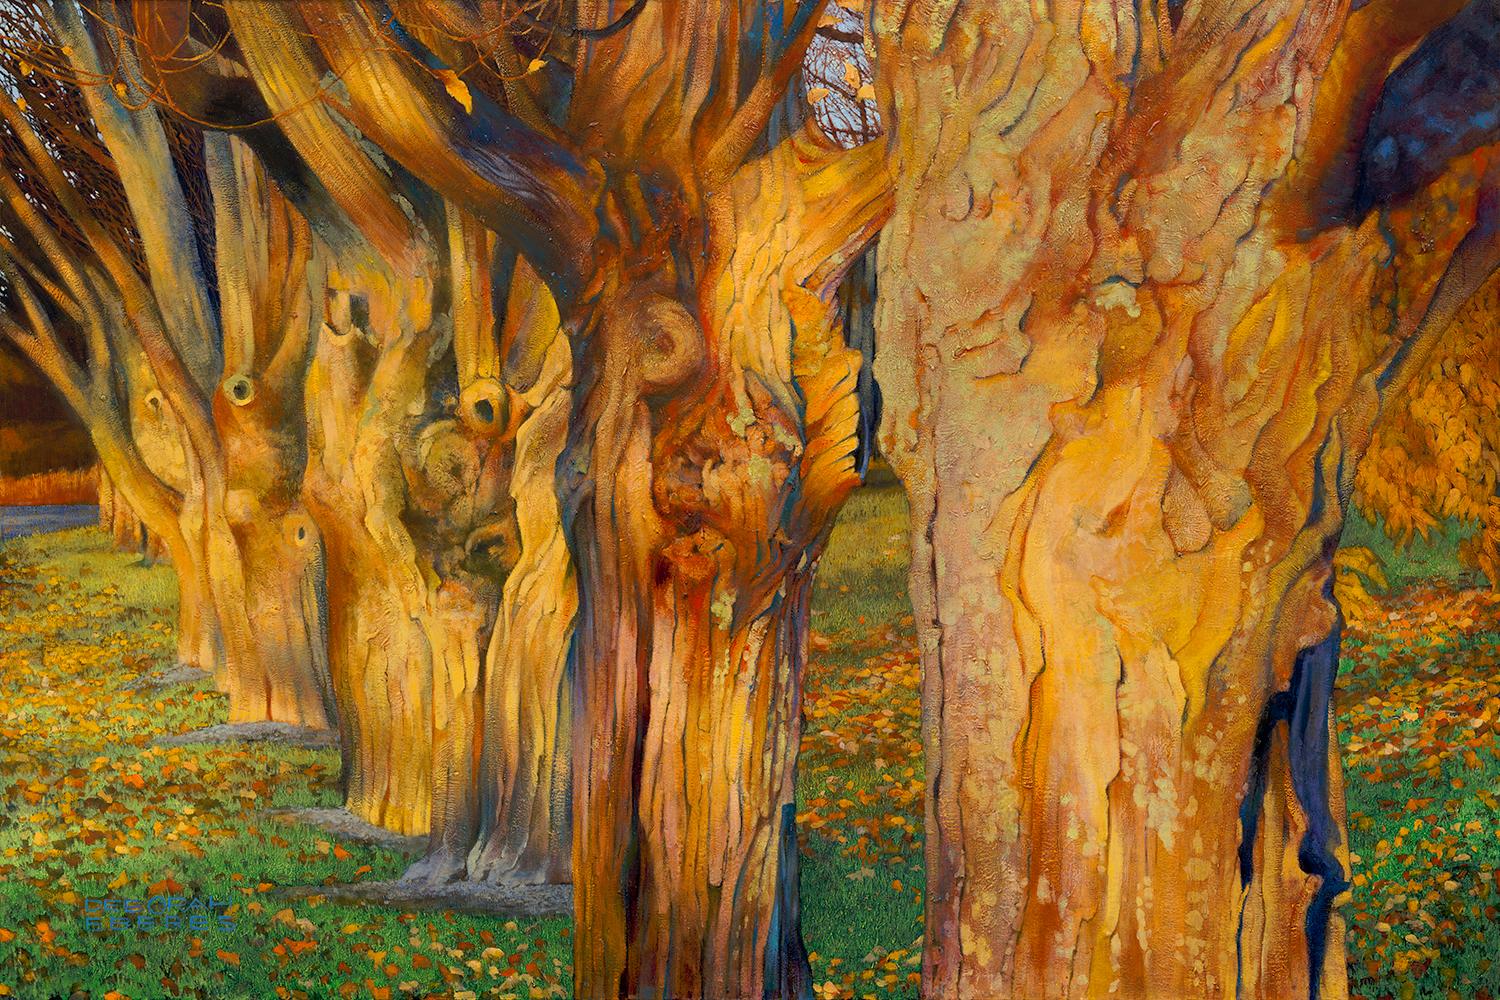 Deborah Ebbers Landscape Painting - Witness Trees, Sugar Maples Bathed in Afternoon Light, Original Oil On Canvas